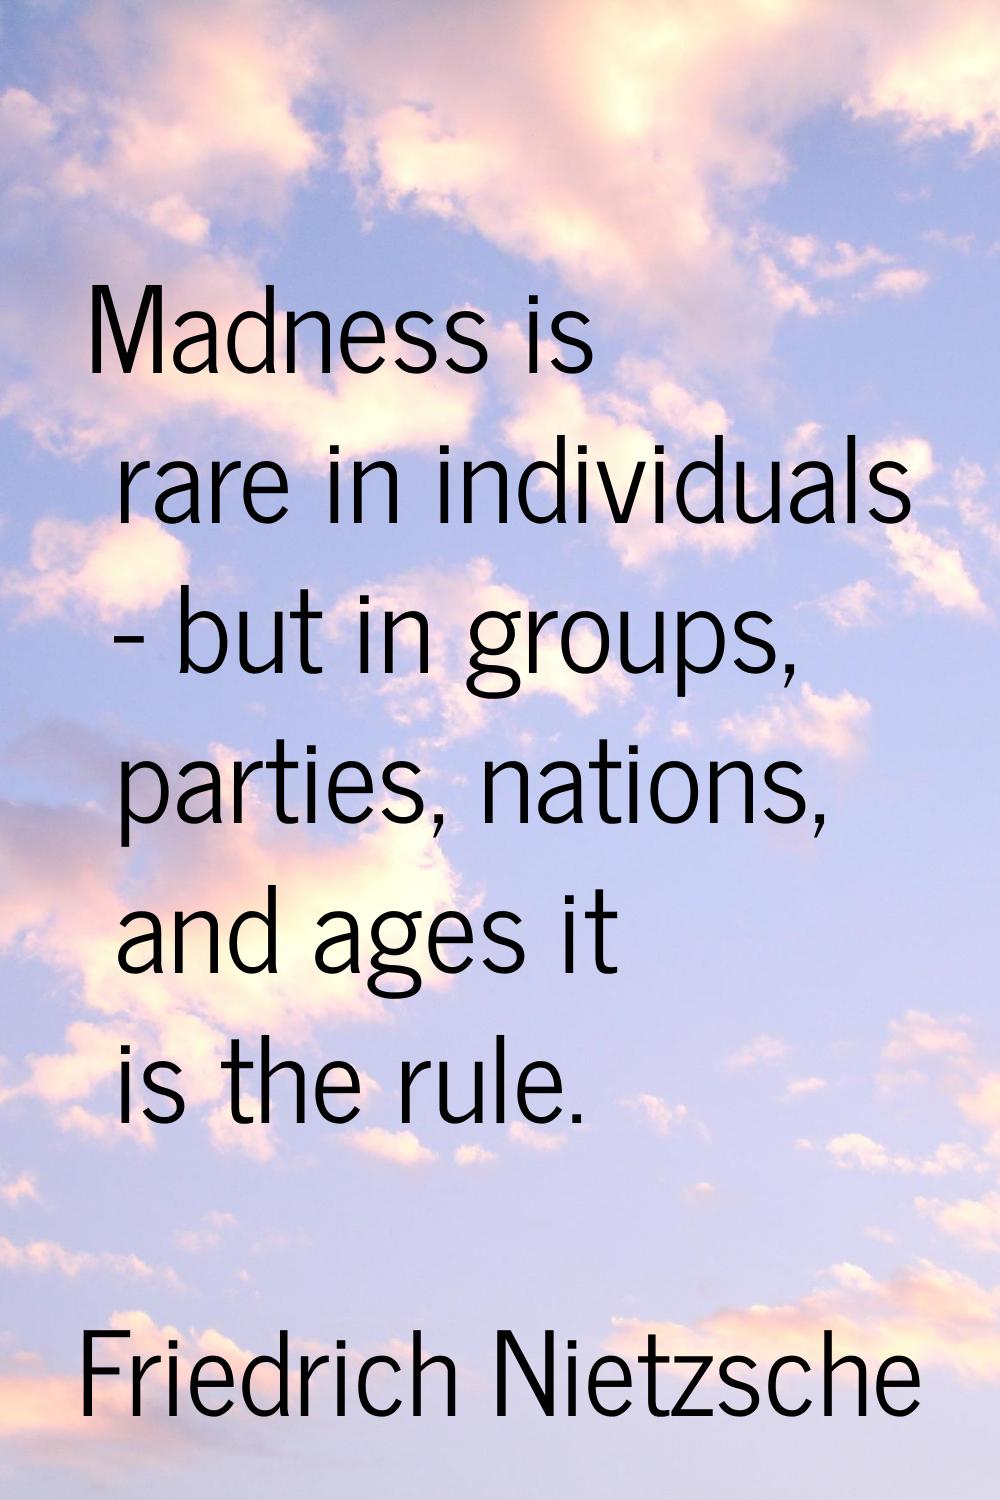 Madness is rare in individuals - but in groups, parties, nations, and ages it is the rule.